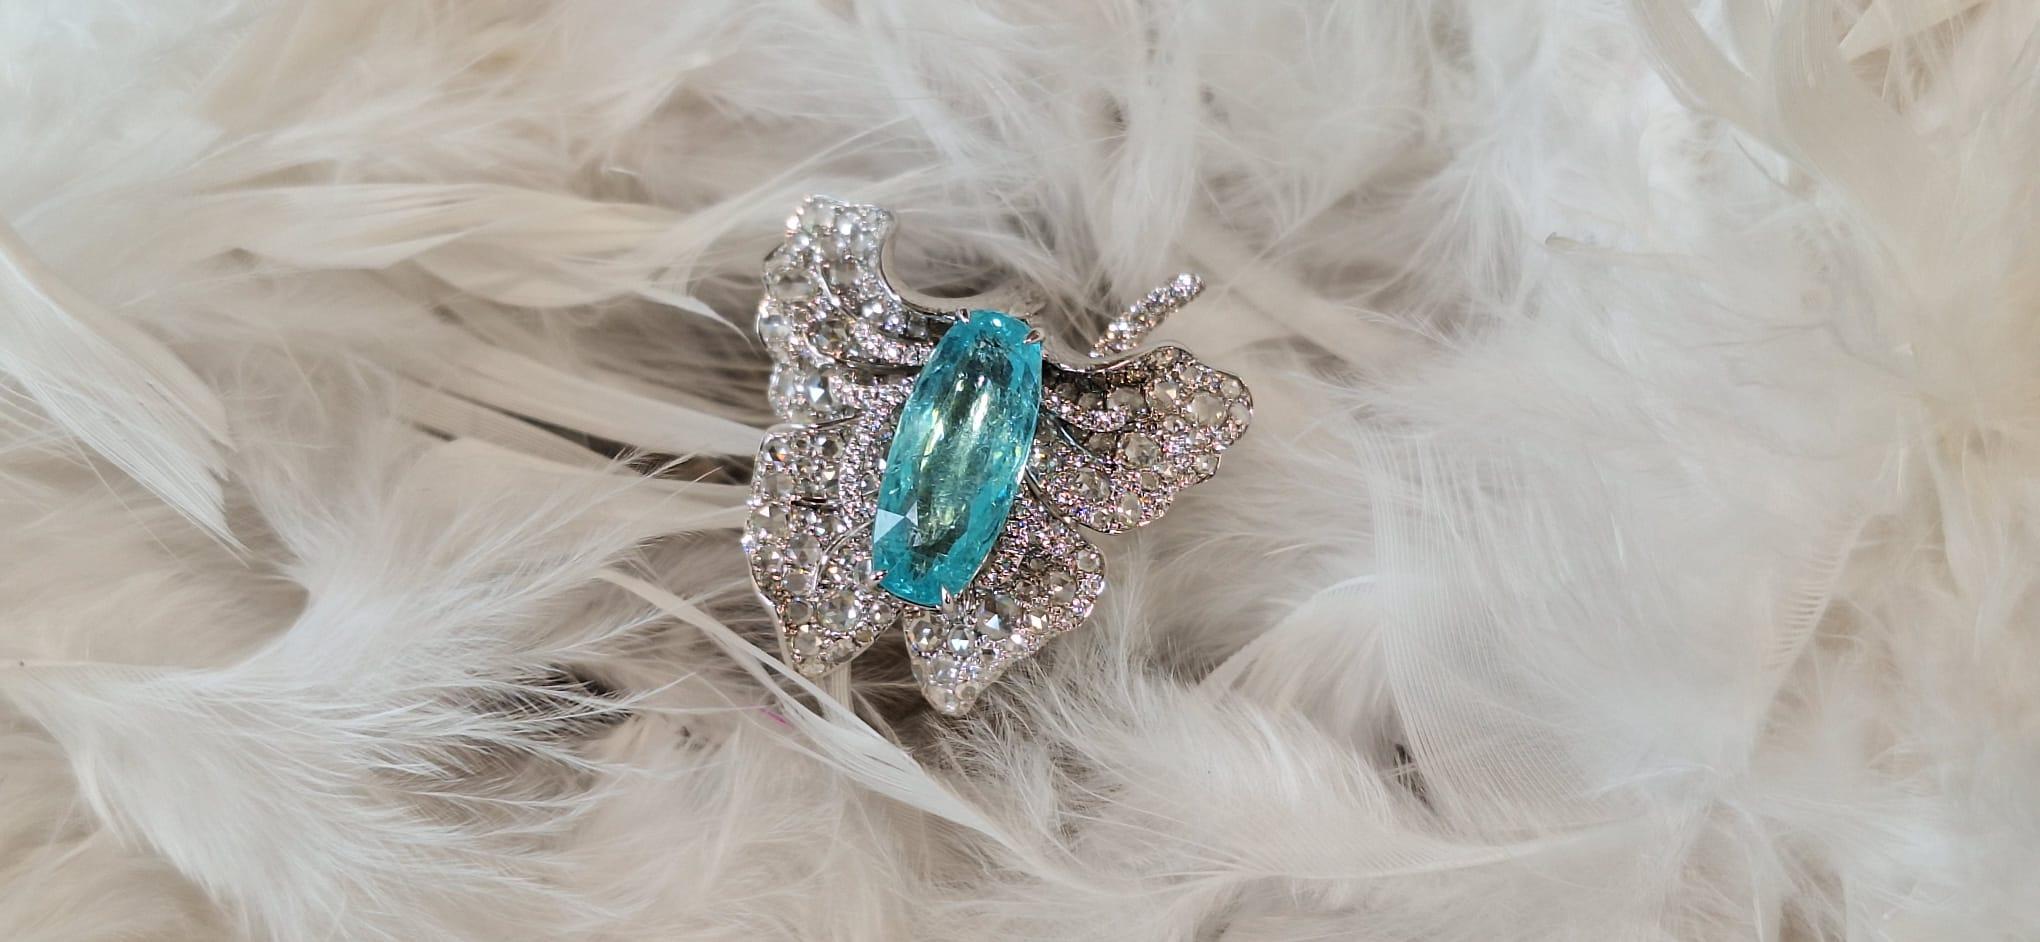 18K White Gold Diamond Ring with Paraiba For Sale 2